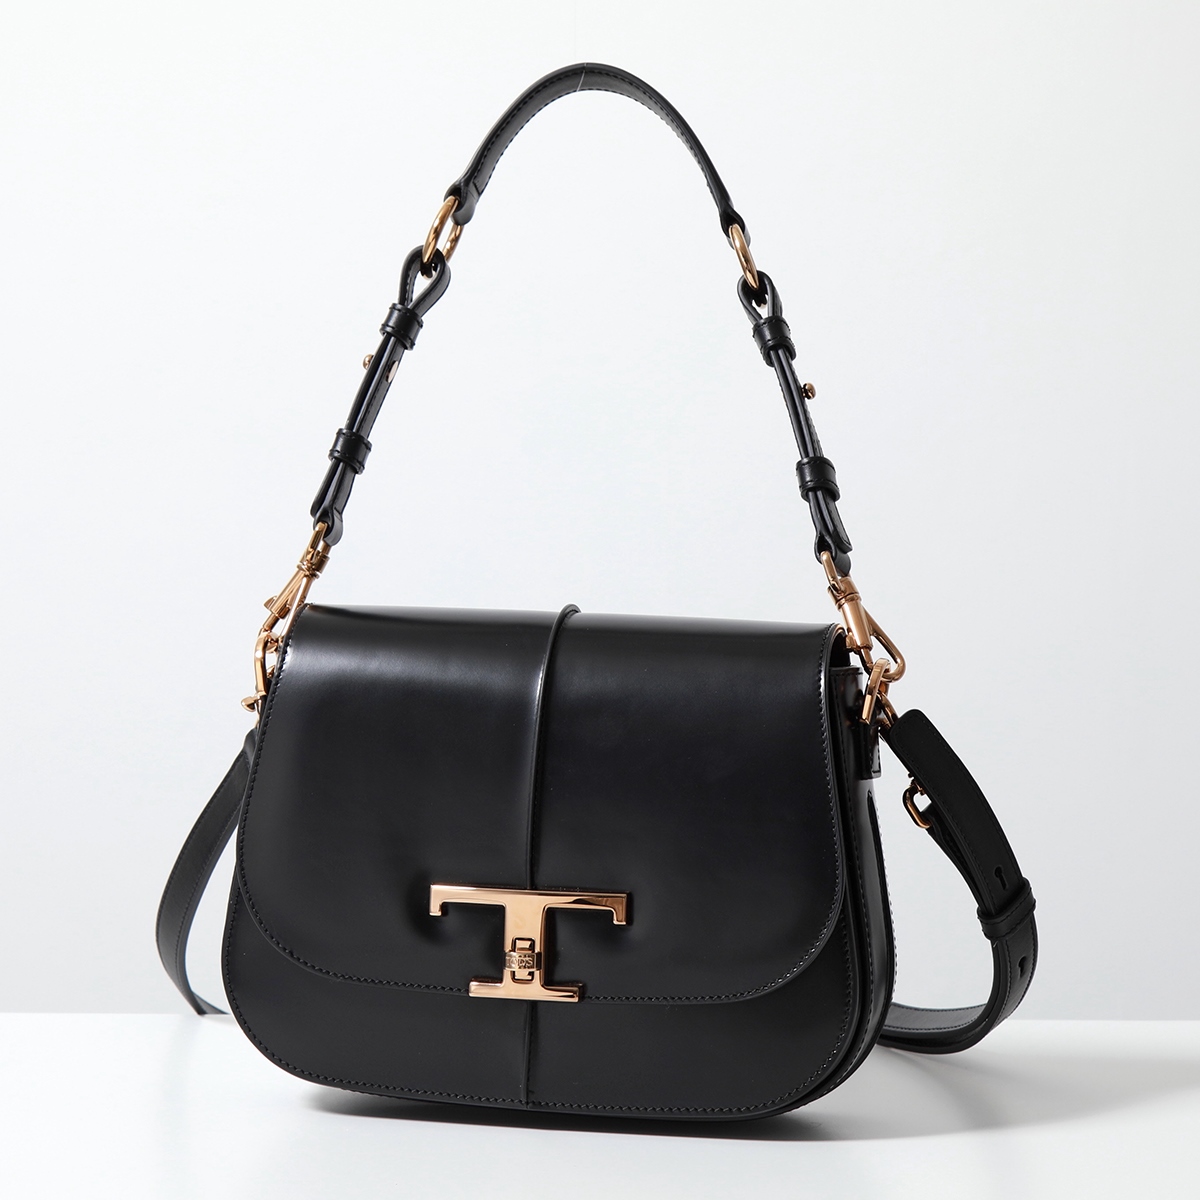 TODS トッズ ショルダーバッグ T TIMELESS Tタイムレス XBWTSGI0100KET 